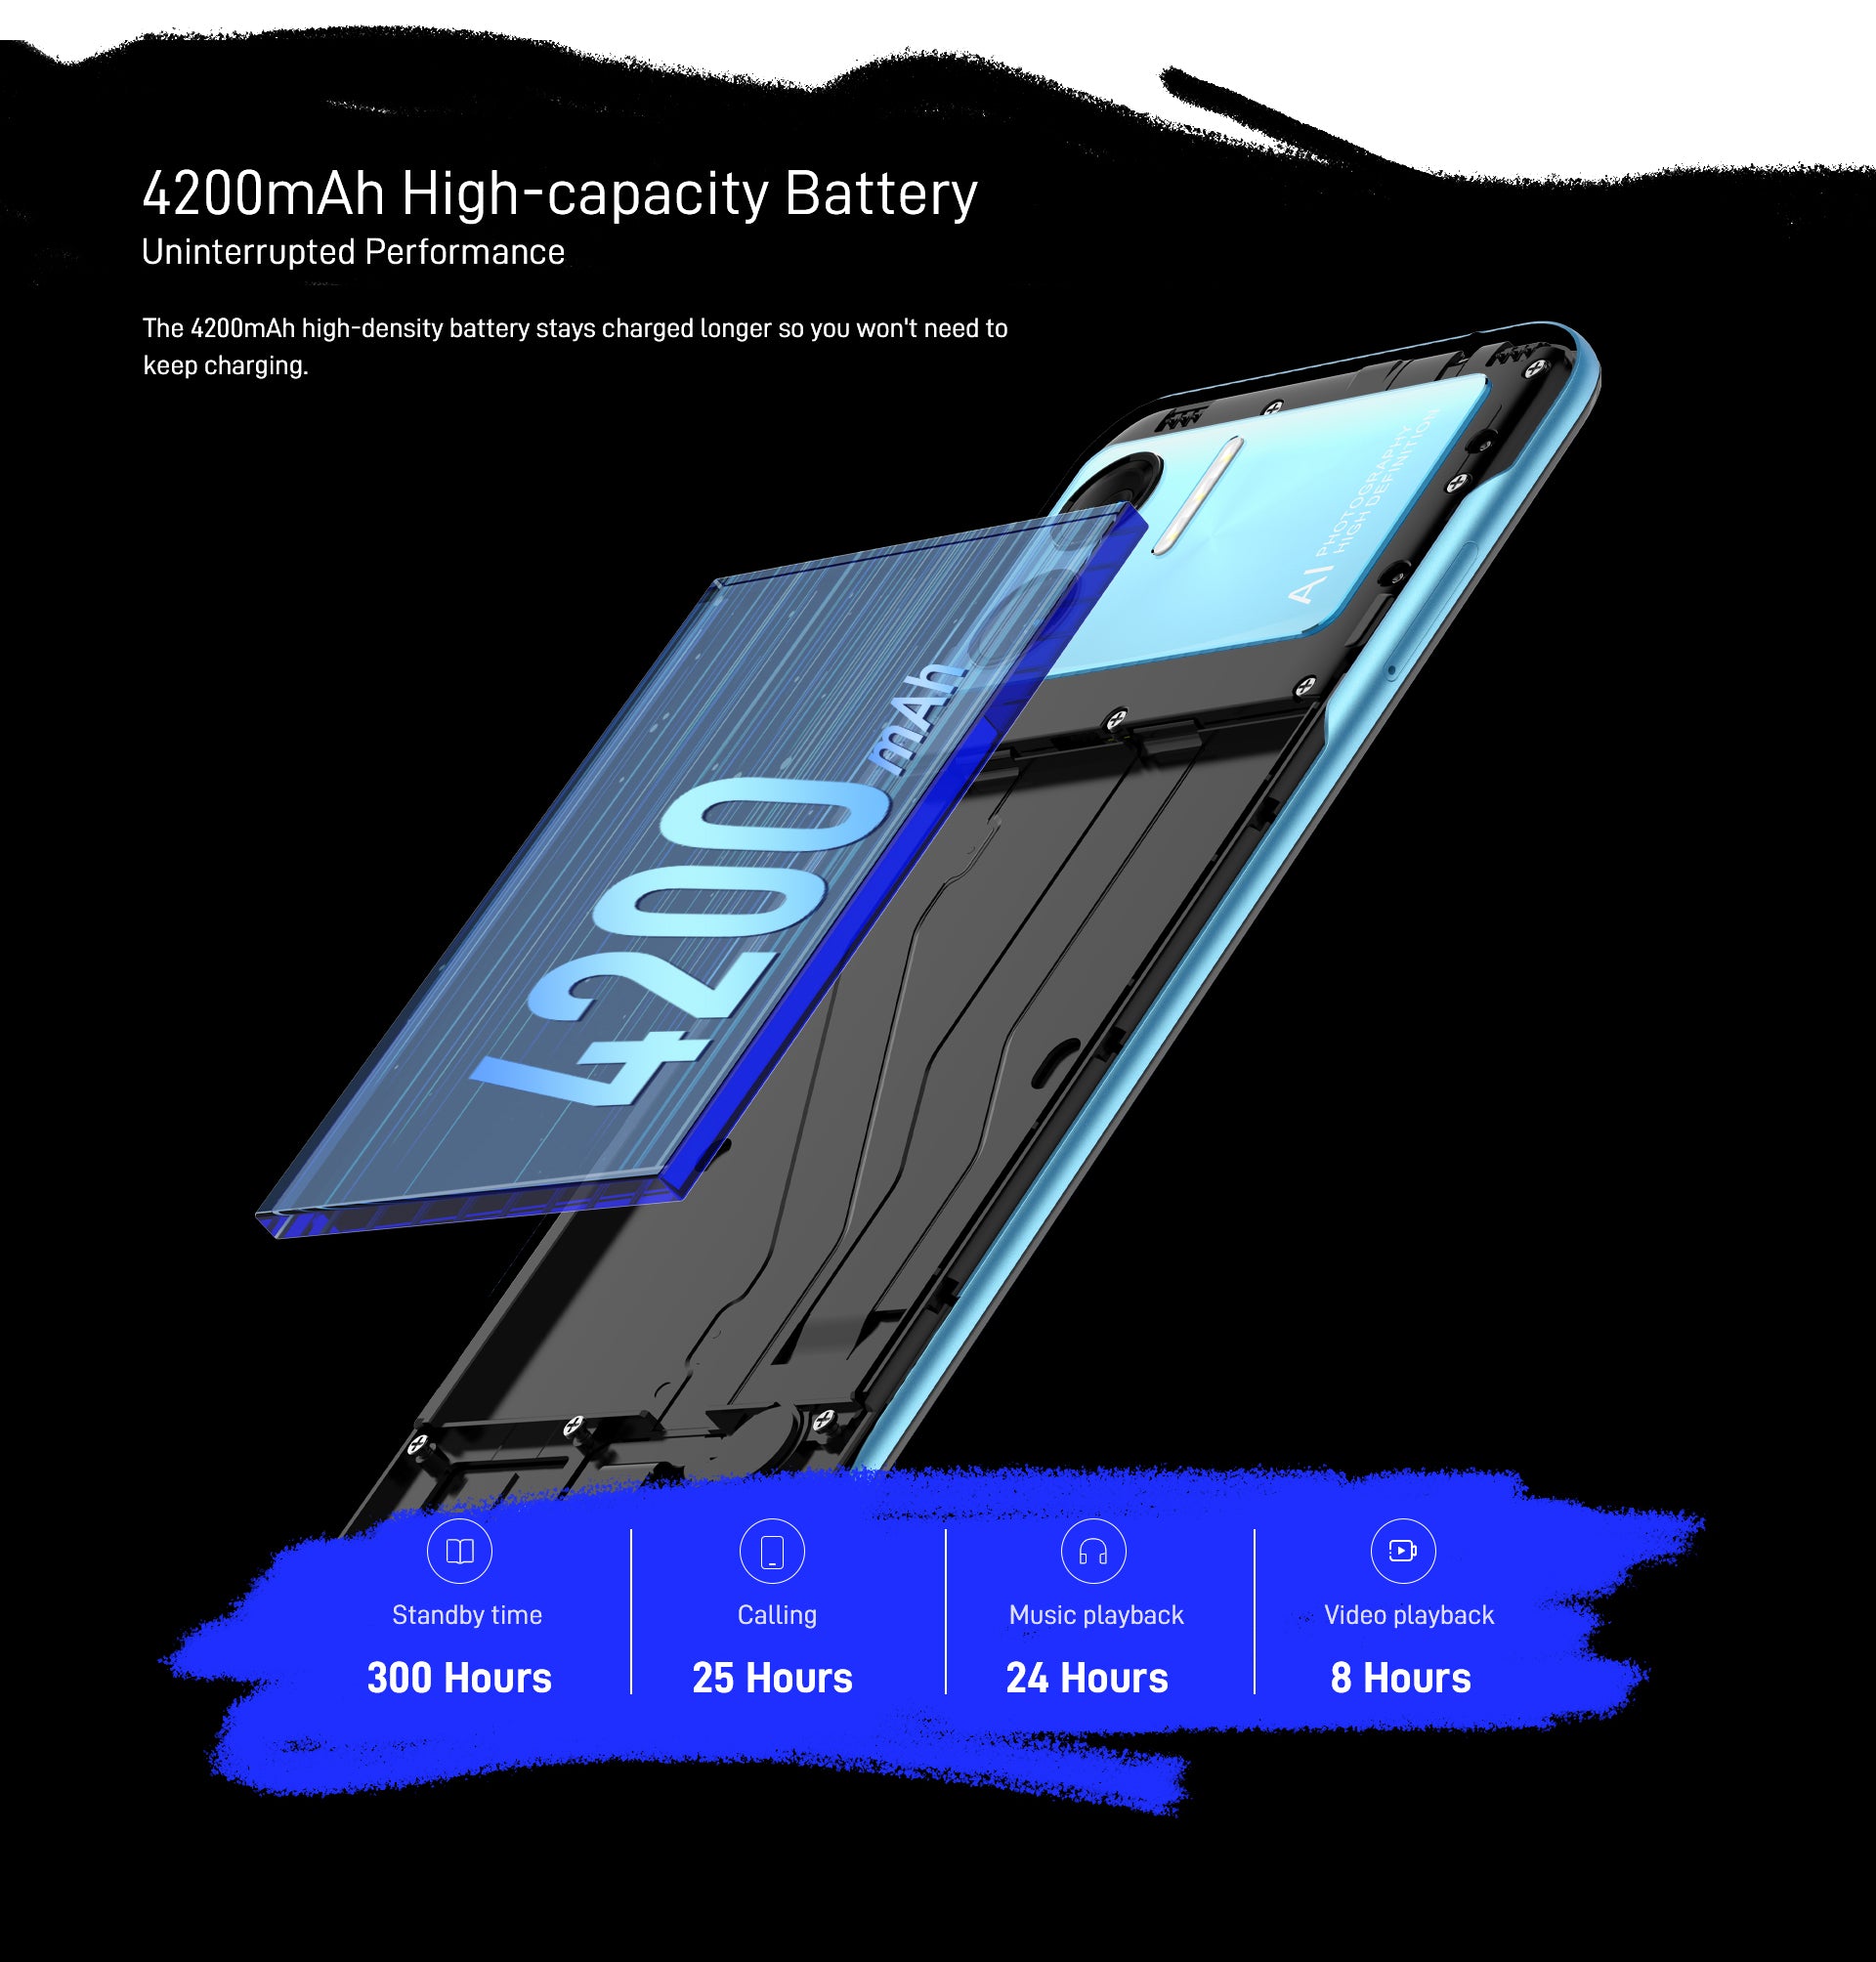 Uninterrupted Performance 4200mAh High-capacity Battery The 4200mAh high-density battery stays charged longer so you won't need to keep charging.  -300 hours Standby time  -25 hours Calling  -8 hours Video playback  -24 hours Music playback